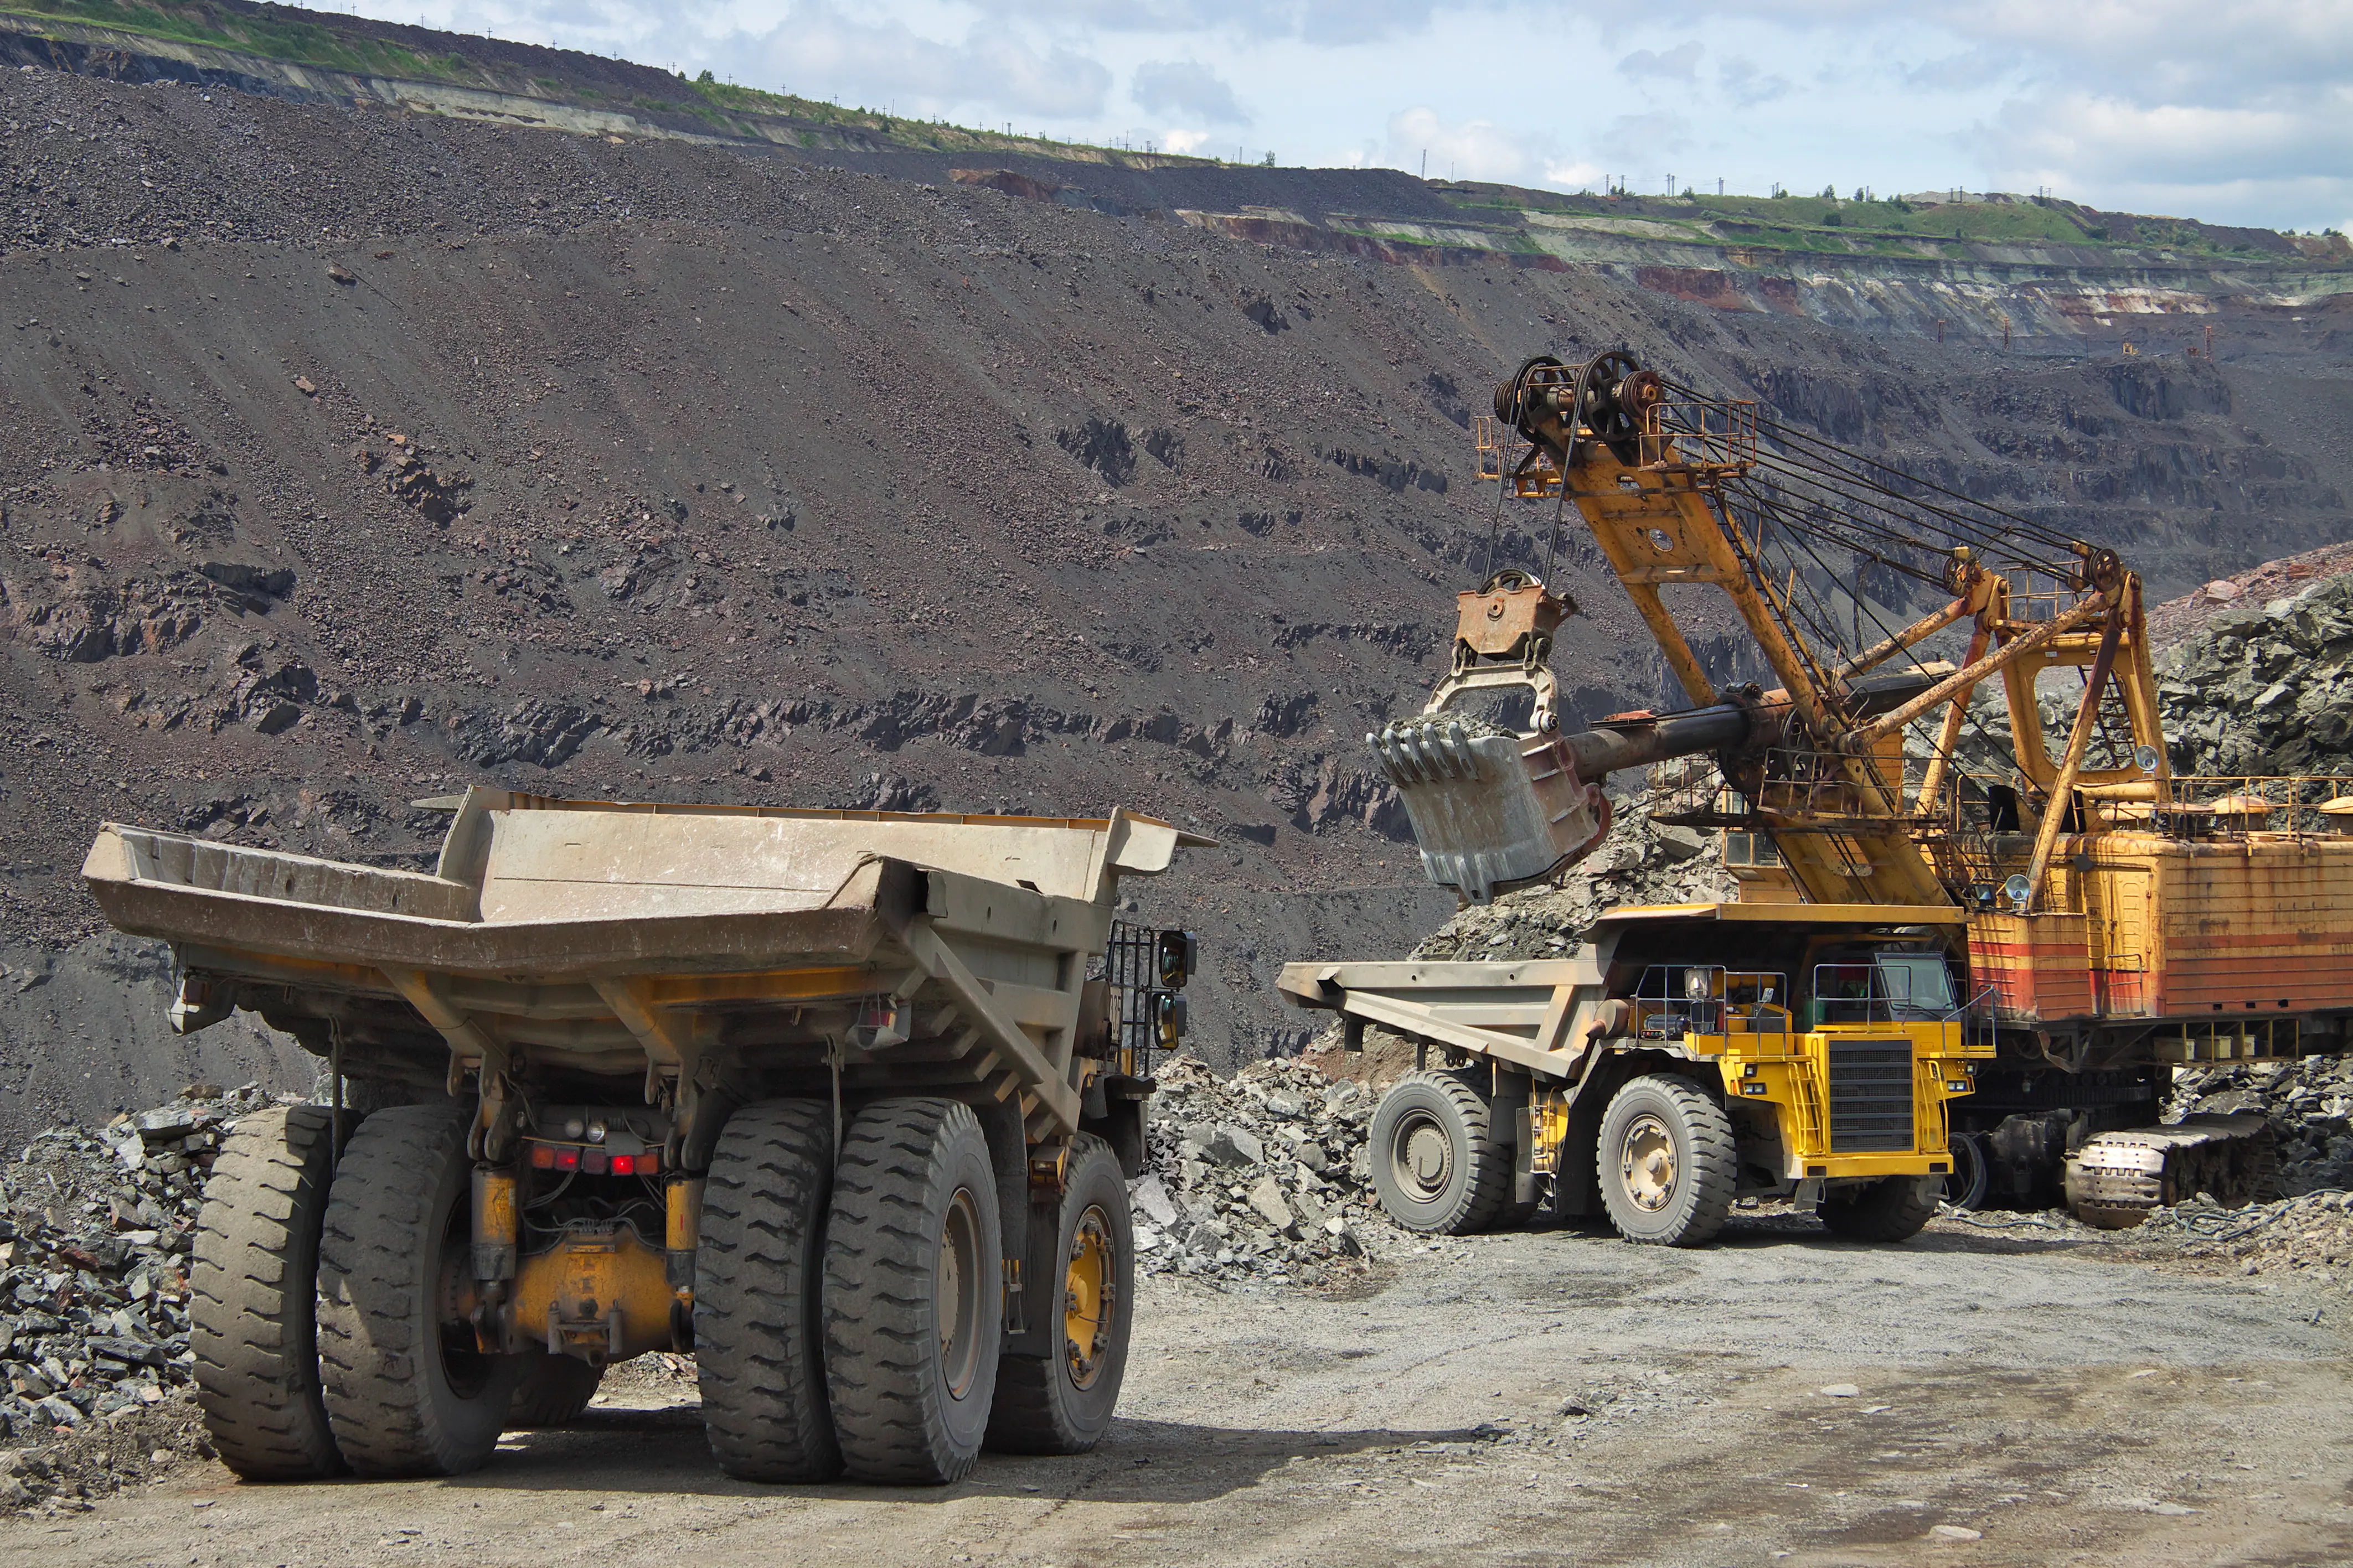 Mineral resources construction vehicles in a quarry.